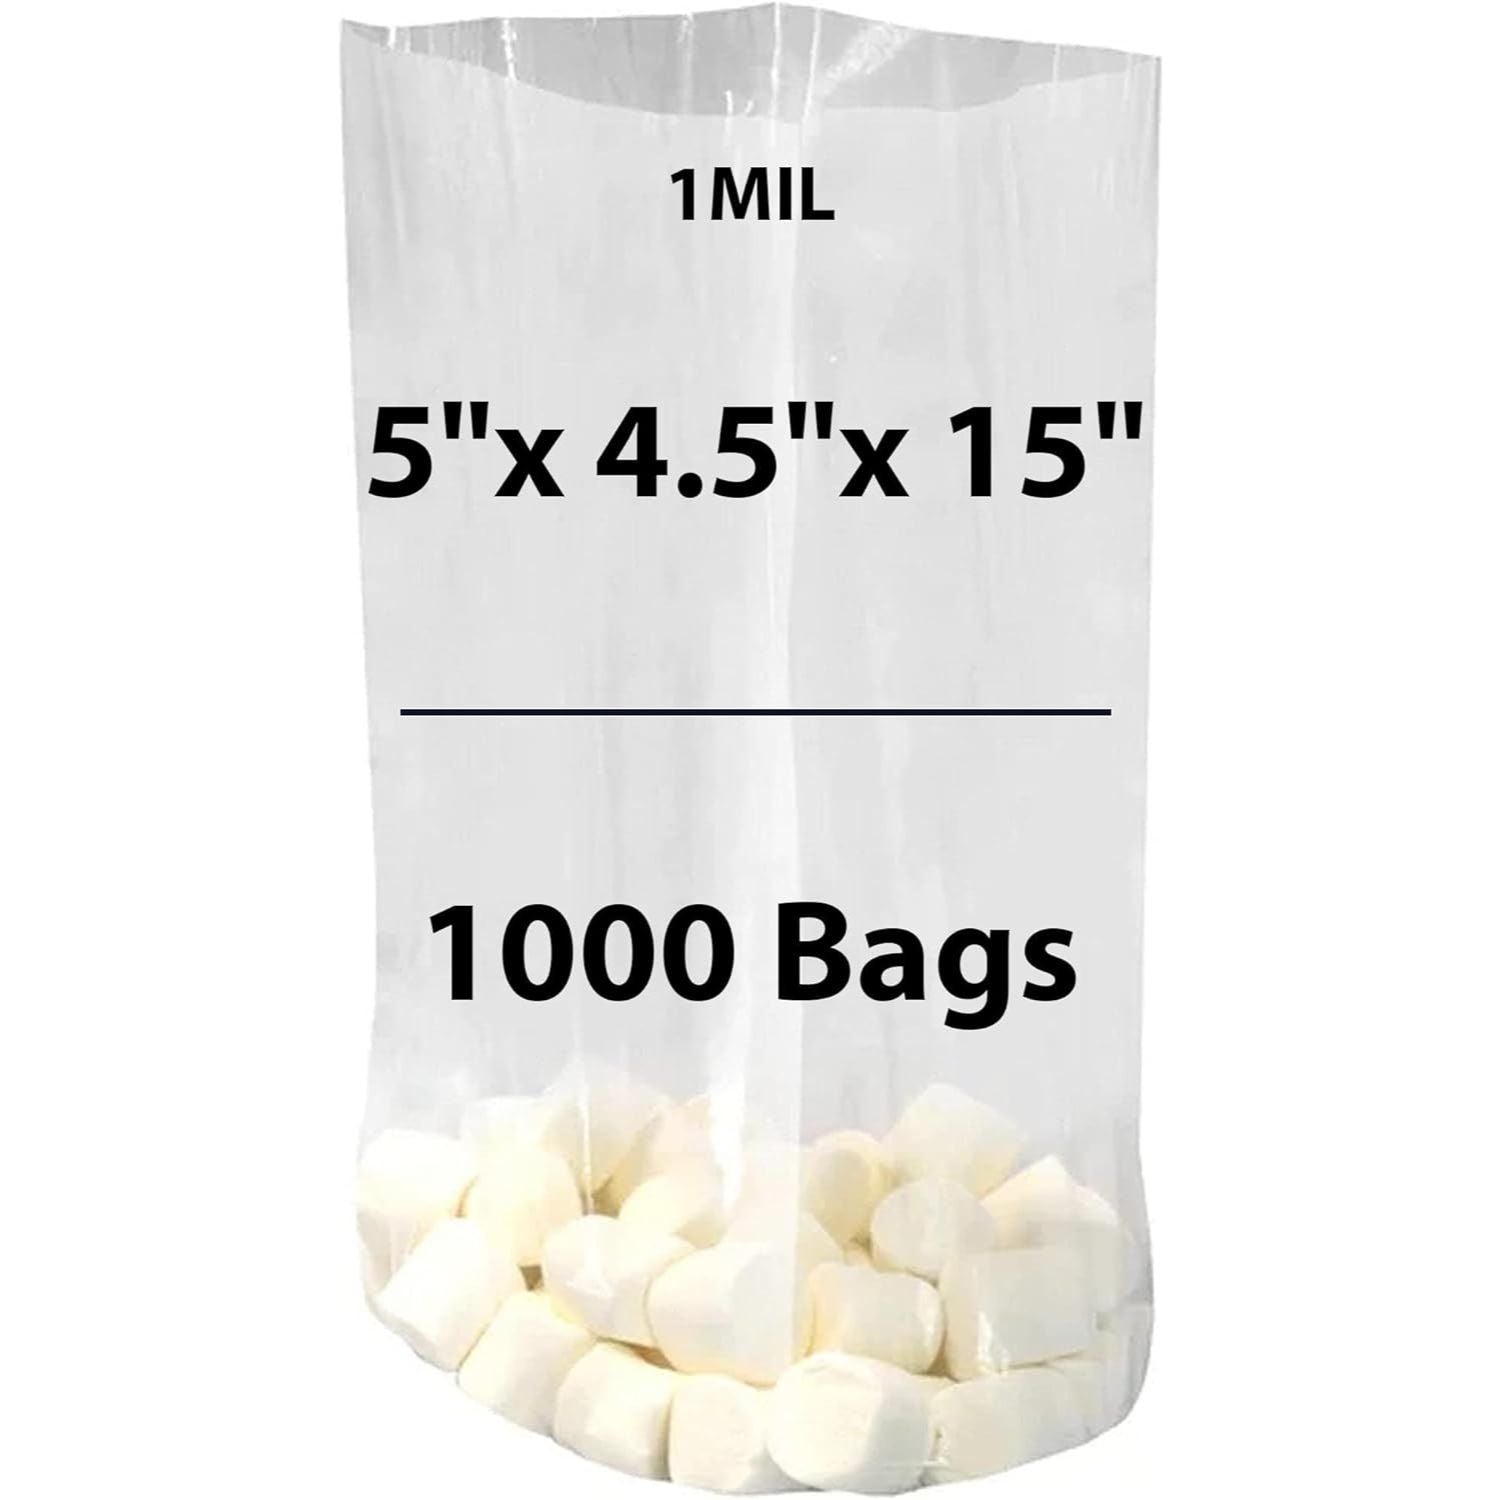 Clear Gusseted Poly bags 1 Mil, 5 inch X 4.5 inch X 15 inch Pack of 1000 Bags